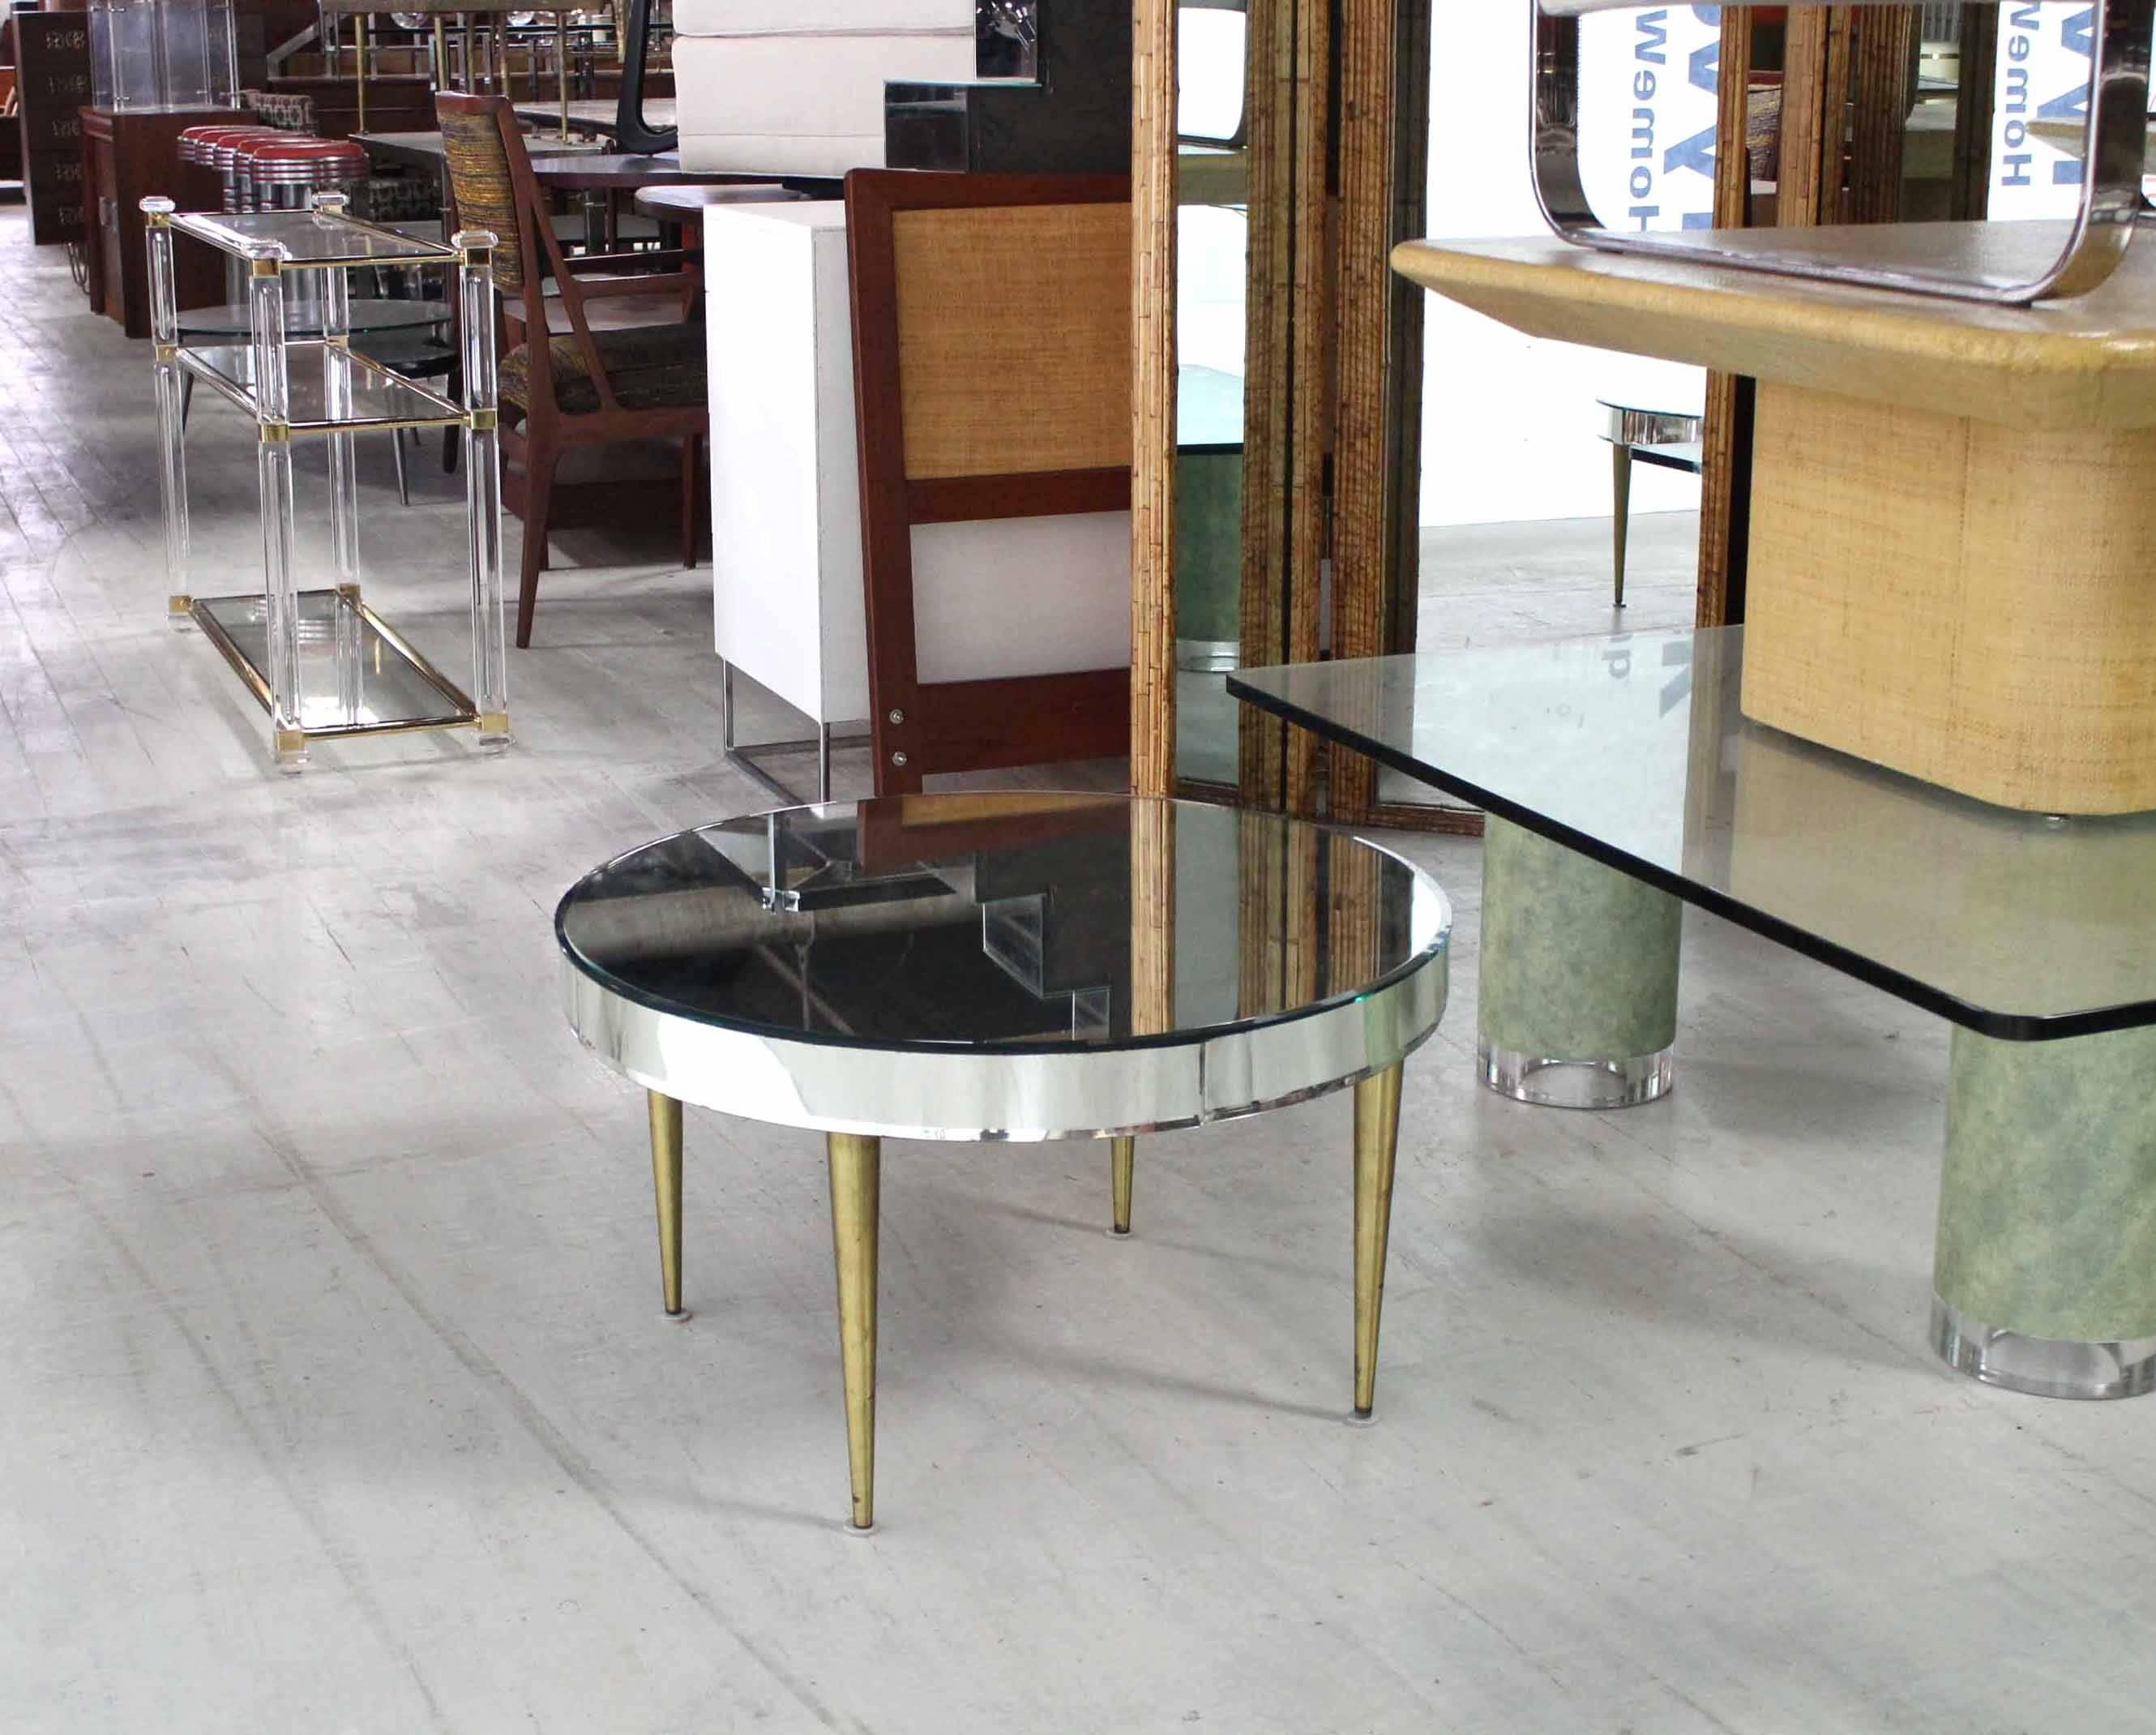 Nice mirrored drum shape midcentury table on tapered brass legs. Nice bent and bevelled glass banding around the edge.